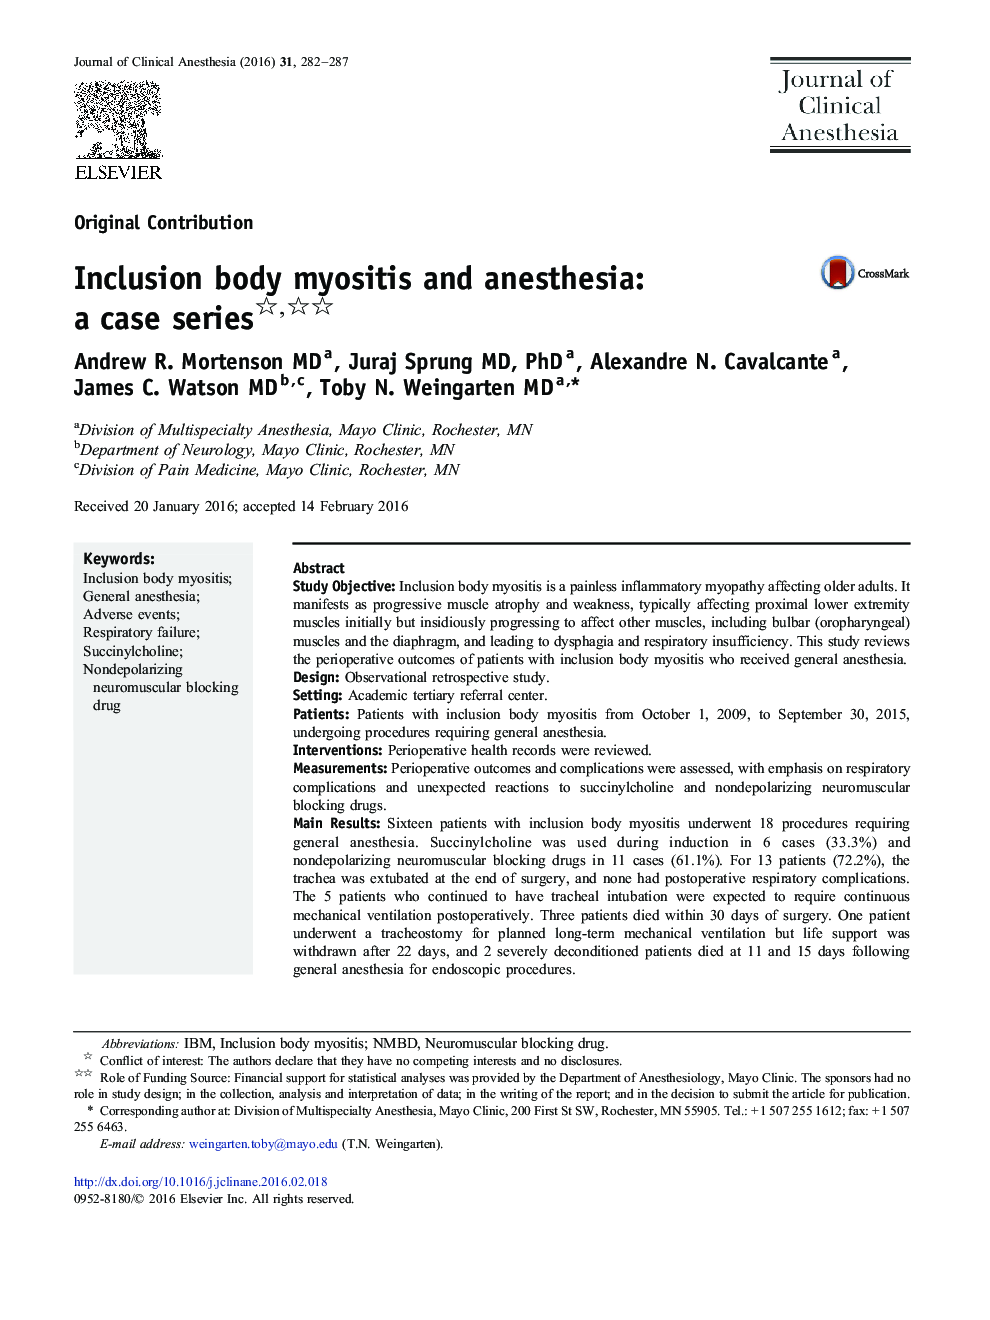 Inclusion body myositis and anesthesia: a case series